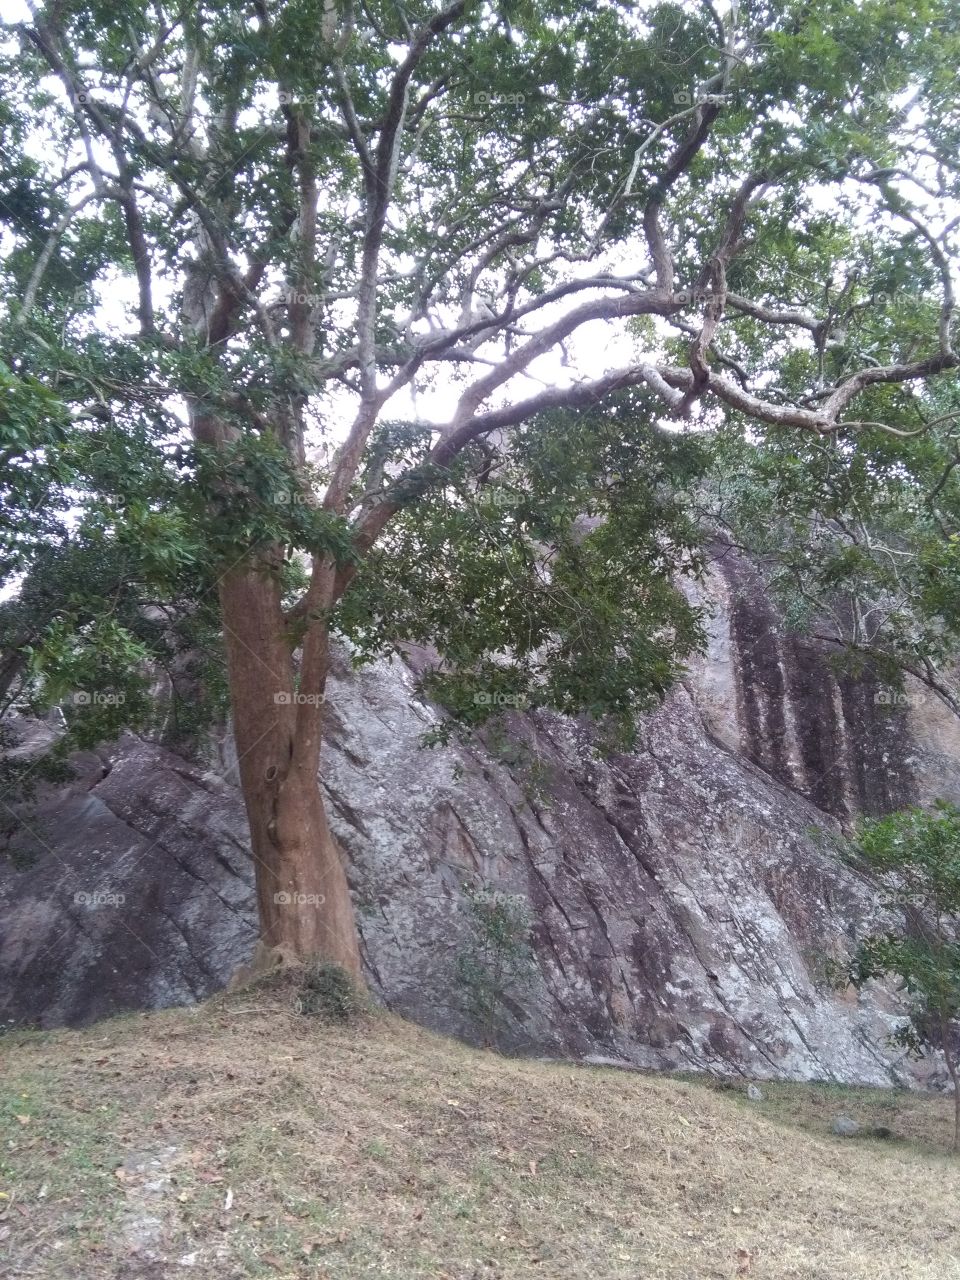 A big tree and rock